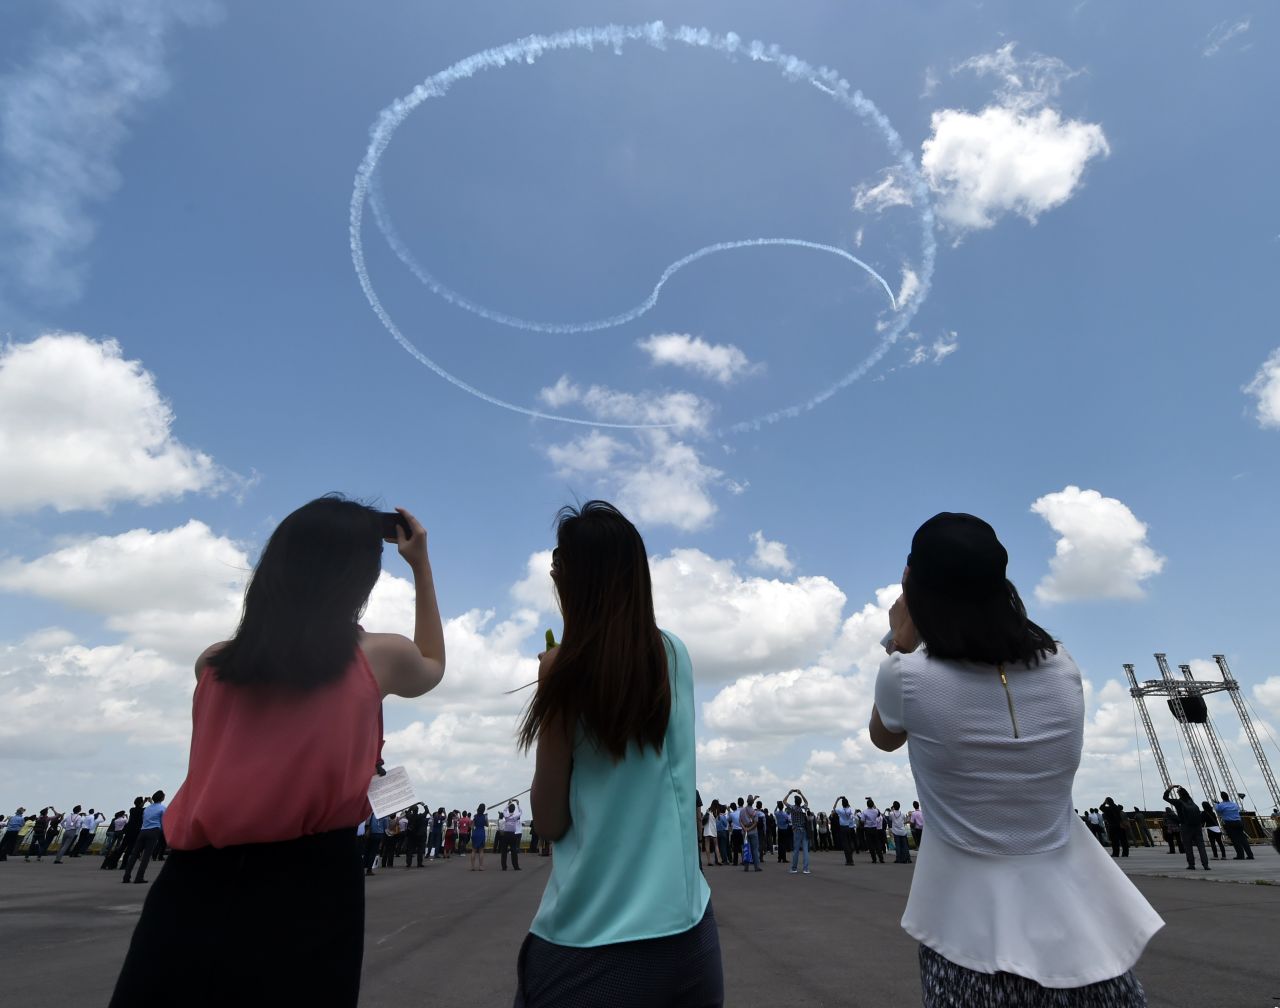 South Korea's Black Eagles created a Ying and Yang logo during the Singapore Airshow.